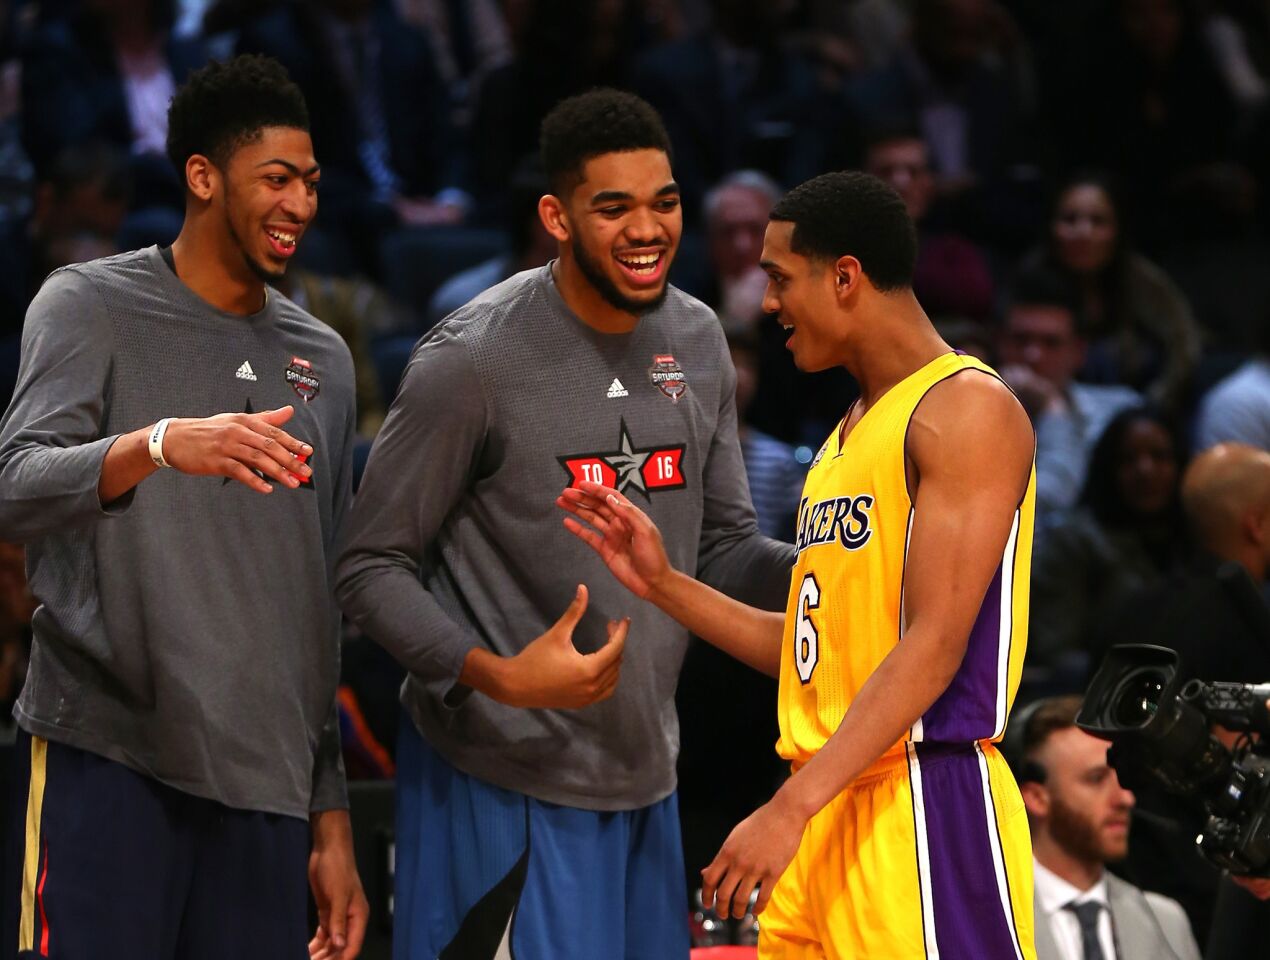 Lakers guard Jordan Clarkson shares a laugh with Pelicans forward Anthony Davis and Timberwolves forward Karl-Anthony Towns during the Skills Challenge on Saturday.